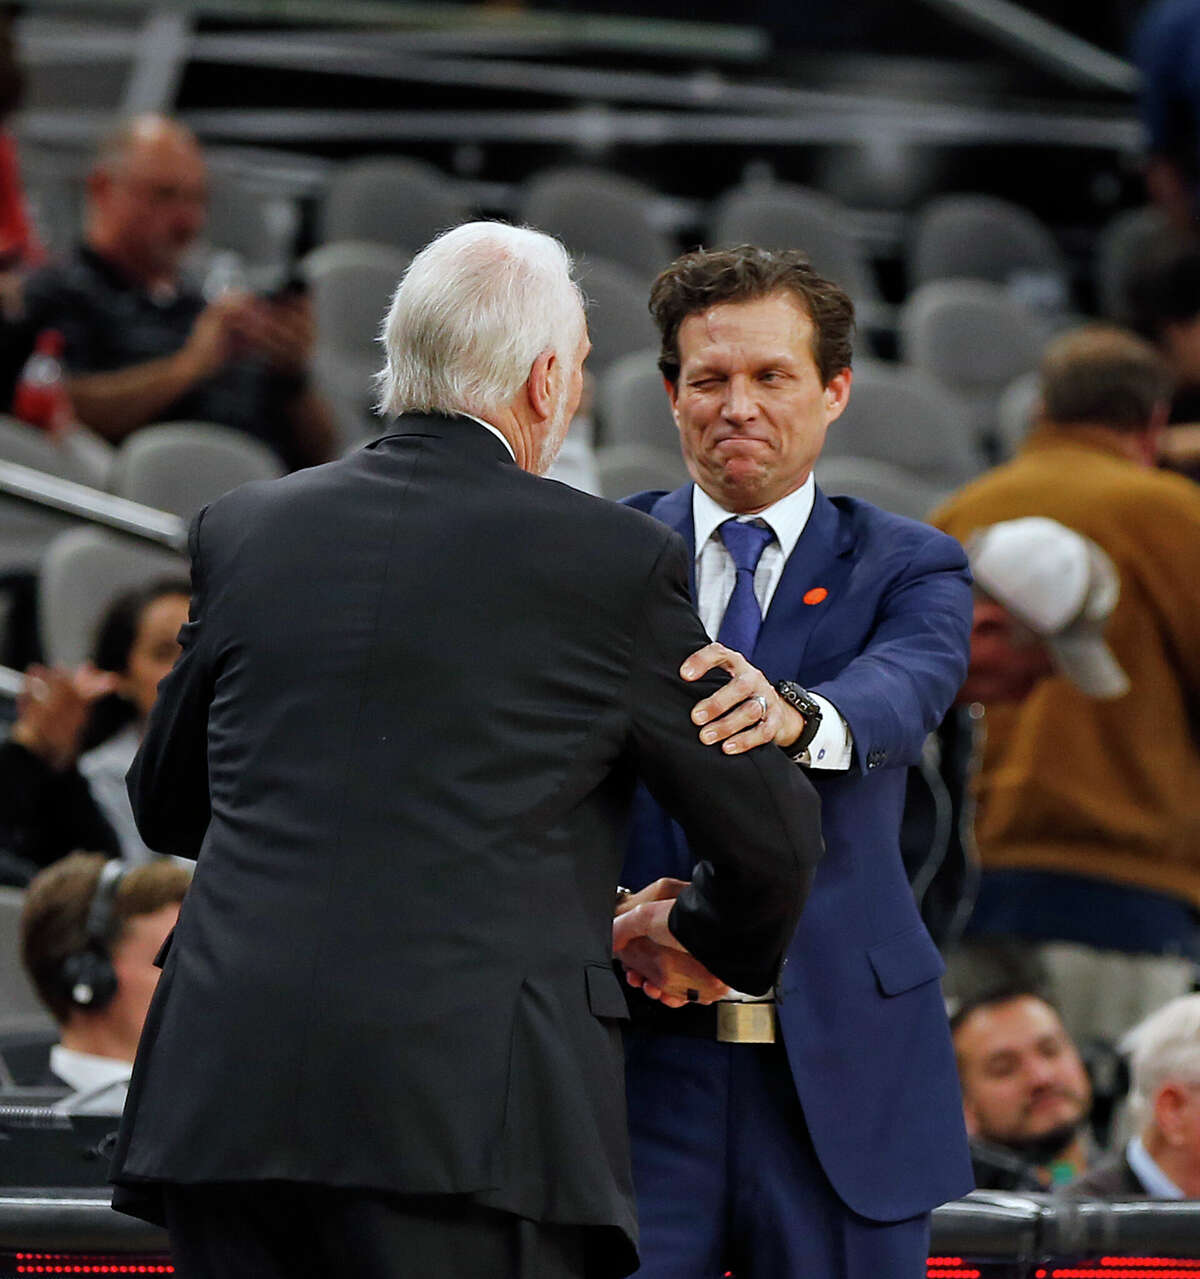 Head coach Quin Snyder of the Utah Jazz greets head coach Gregg Popovich of the San Antonio Spurs at the end of the game at AT&T Center on January 29, 2020 in San Antonio, Texas. 